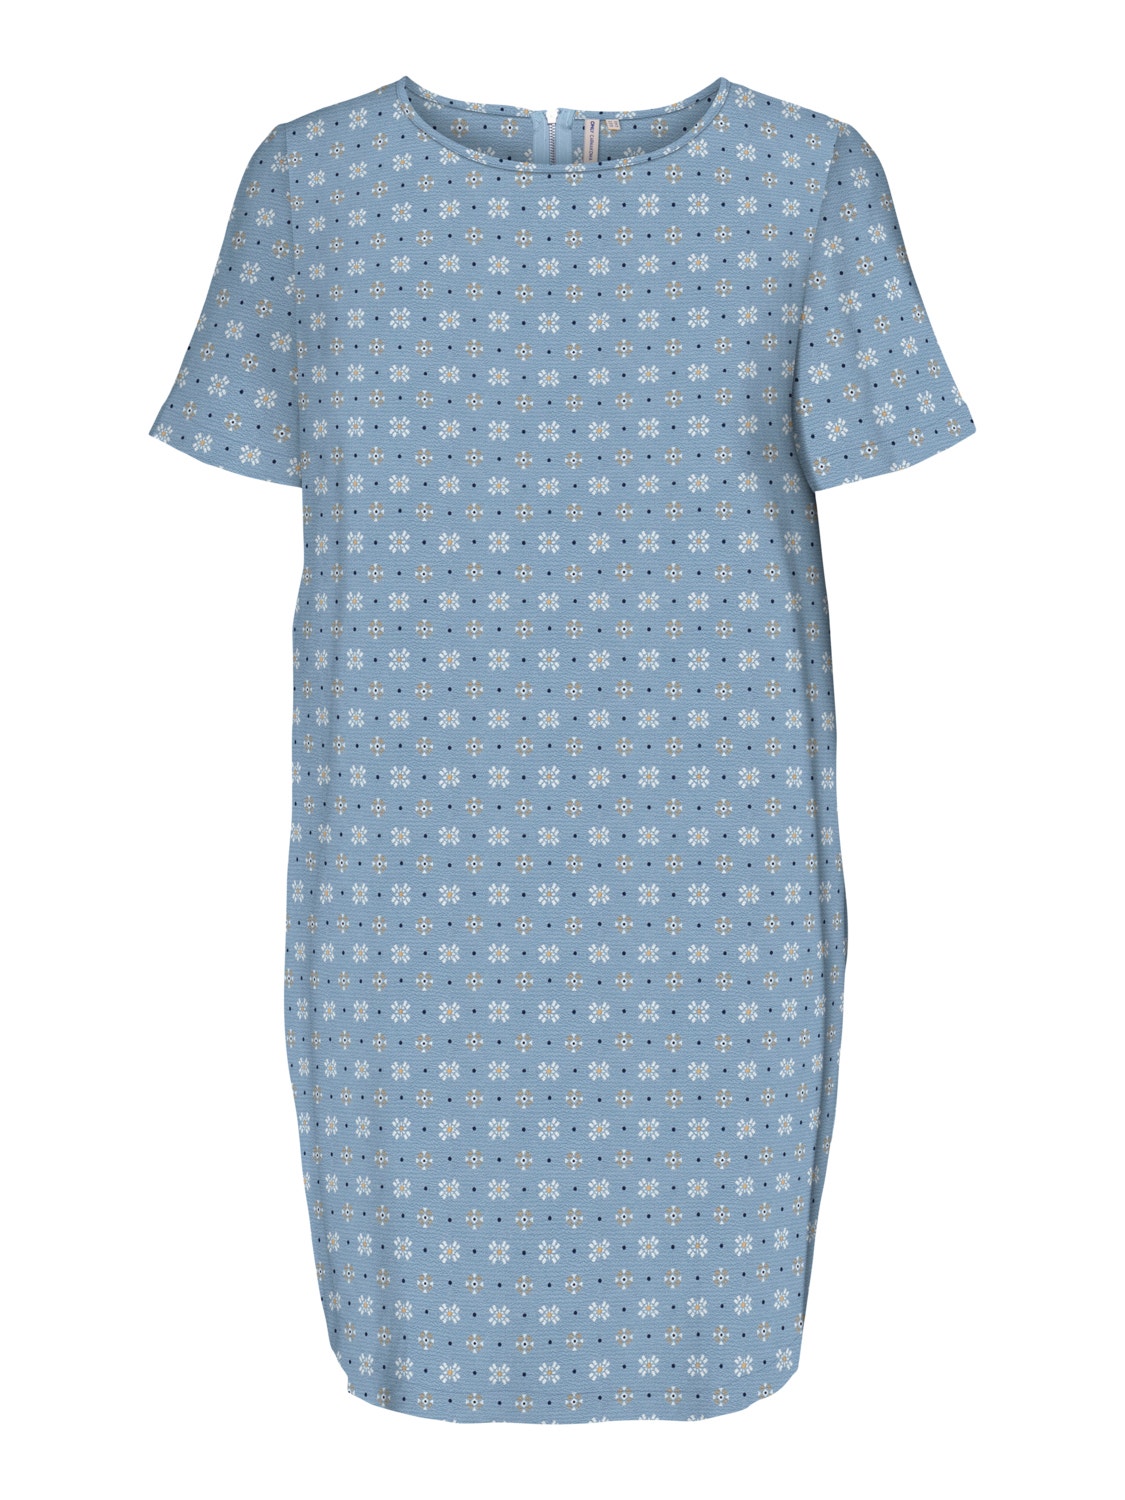 ONLY Curvy short sleeved tunic Dress -Faded Denim - 15261877